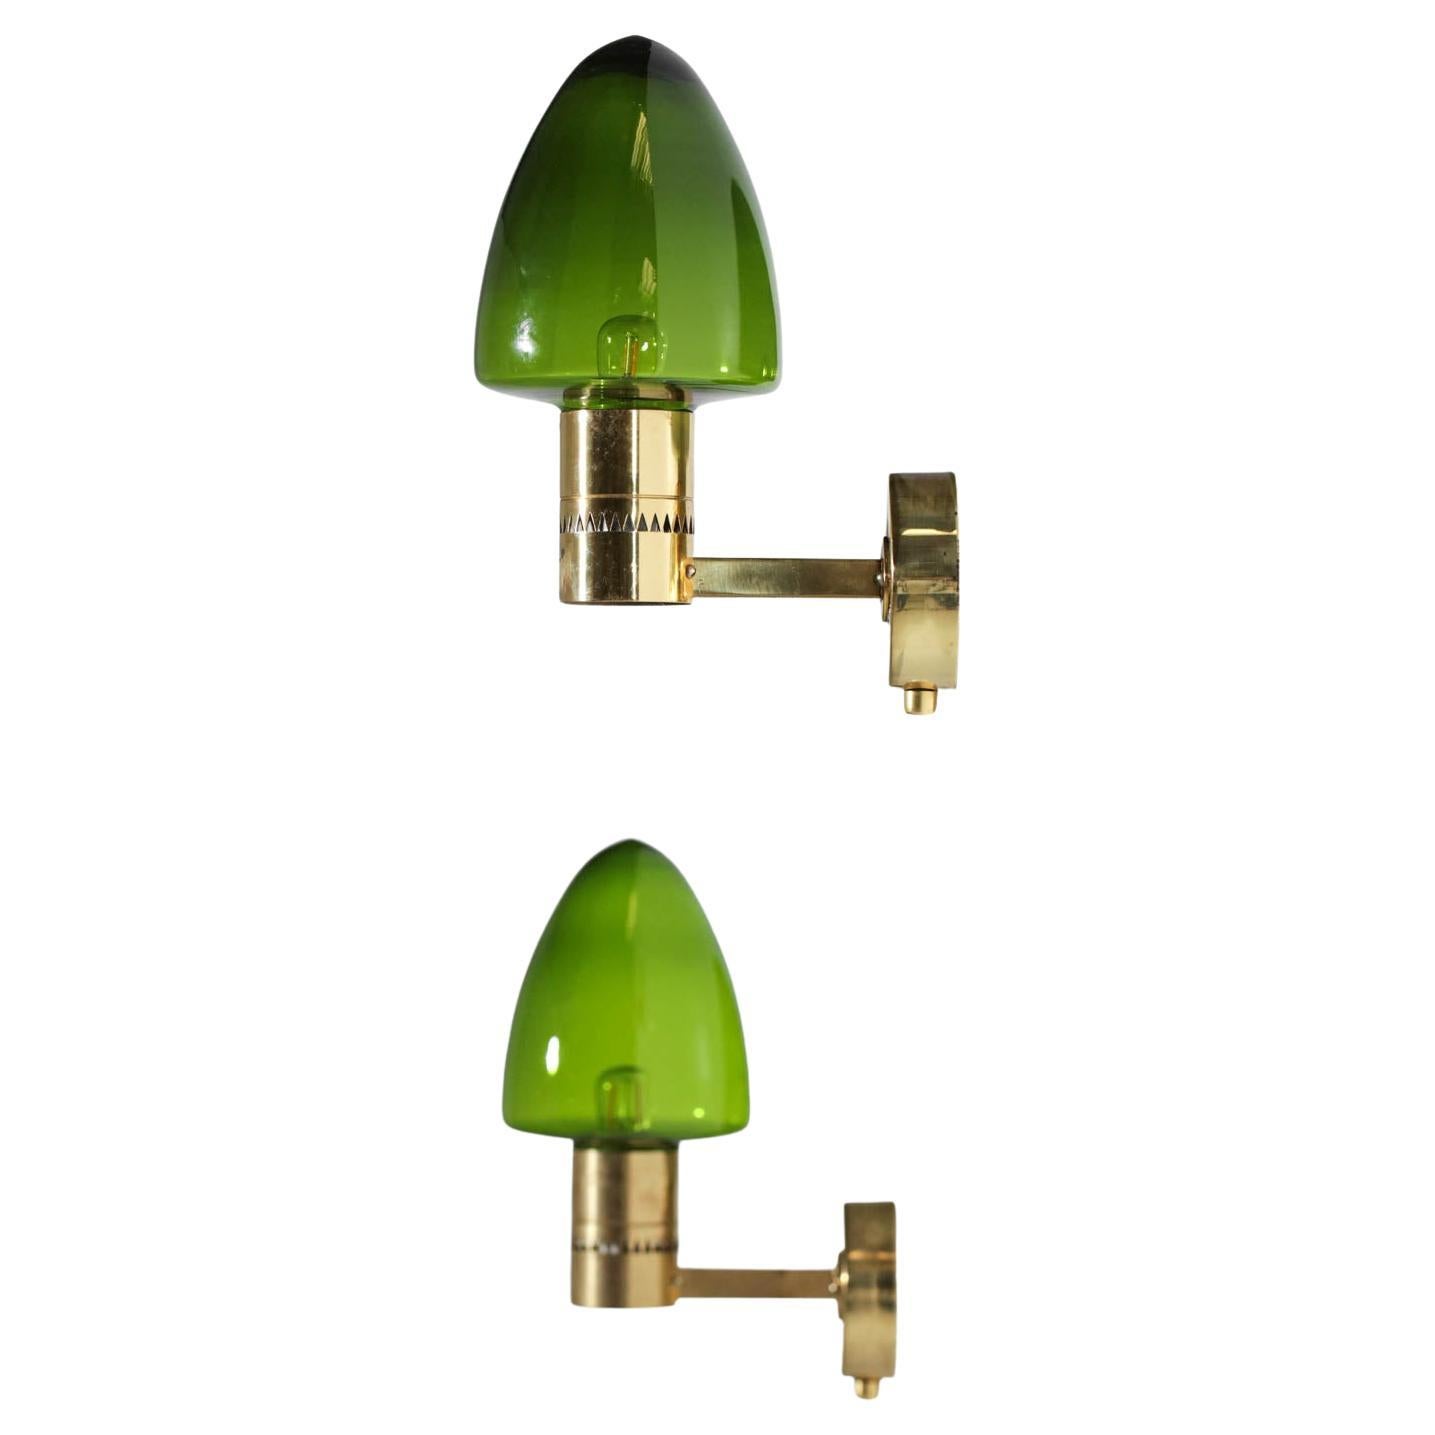 Pair of Scandinavian wall sconces by the famous Swedish designer Hans Agne Jakobsson. Model designed in the 50's. Structure of the sconces in brass and green transparent glass globe. Very nice vintage condition with traces of use and time (see